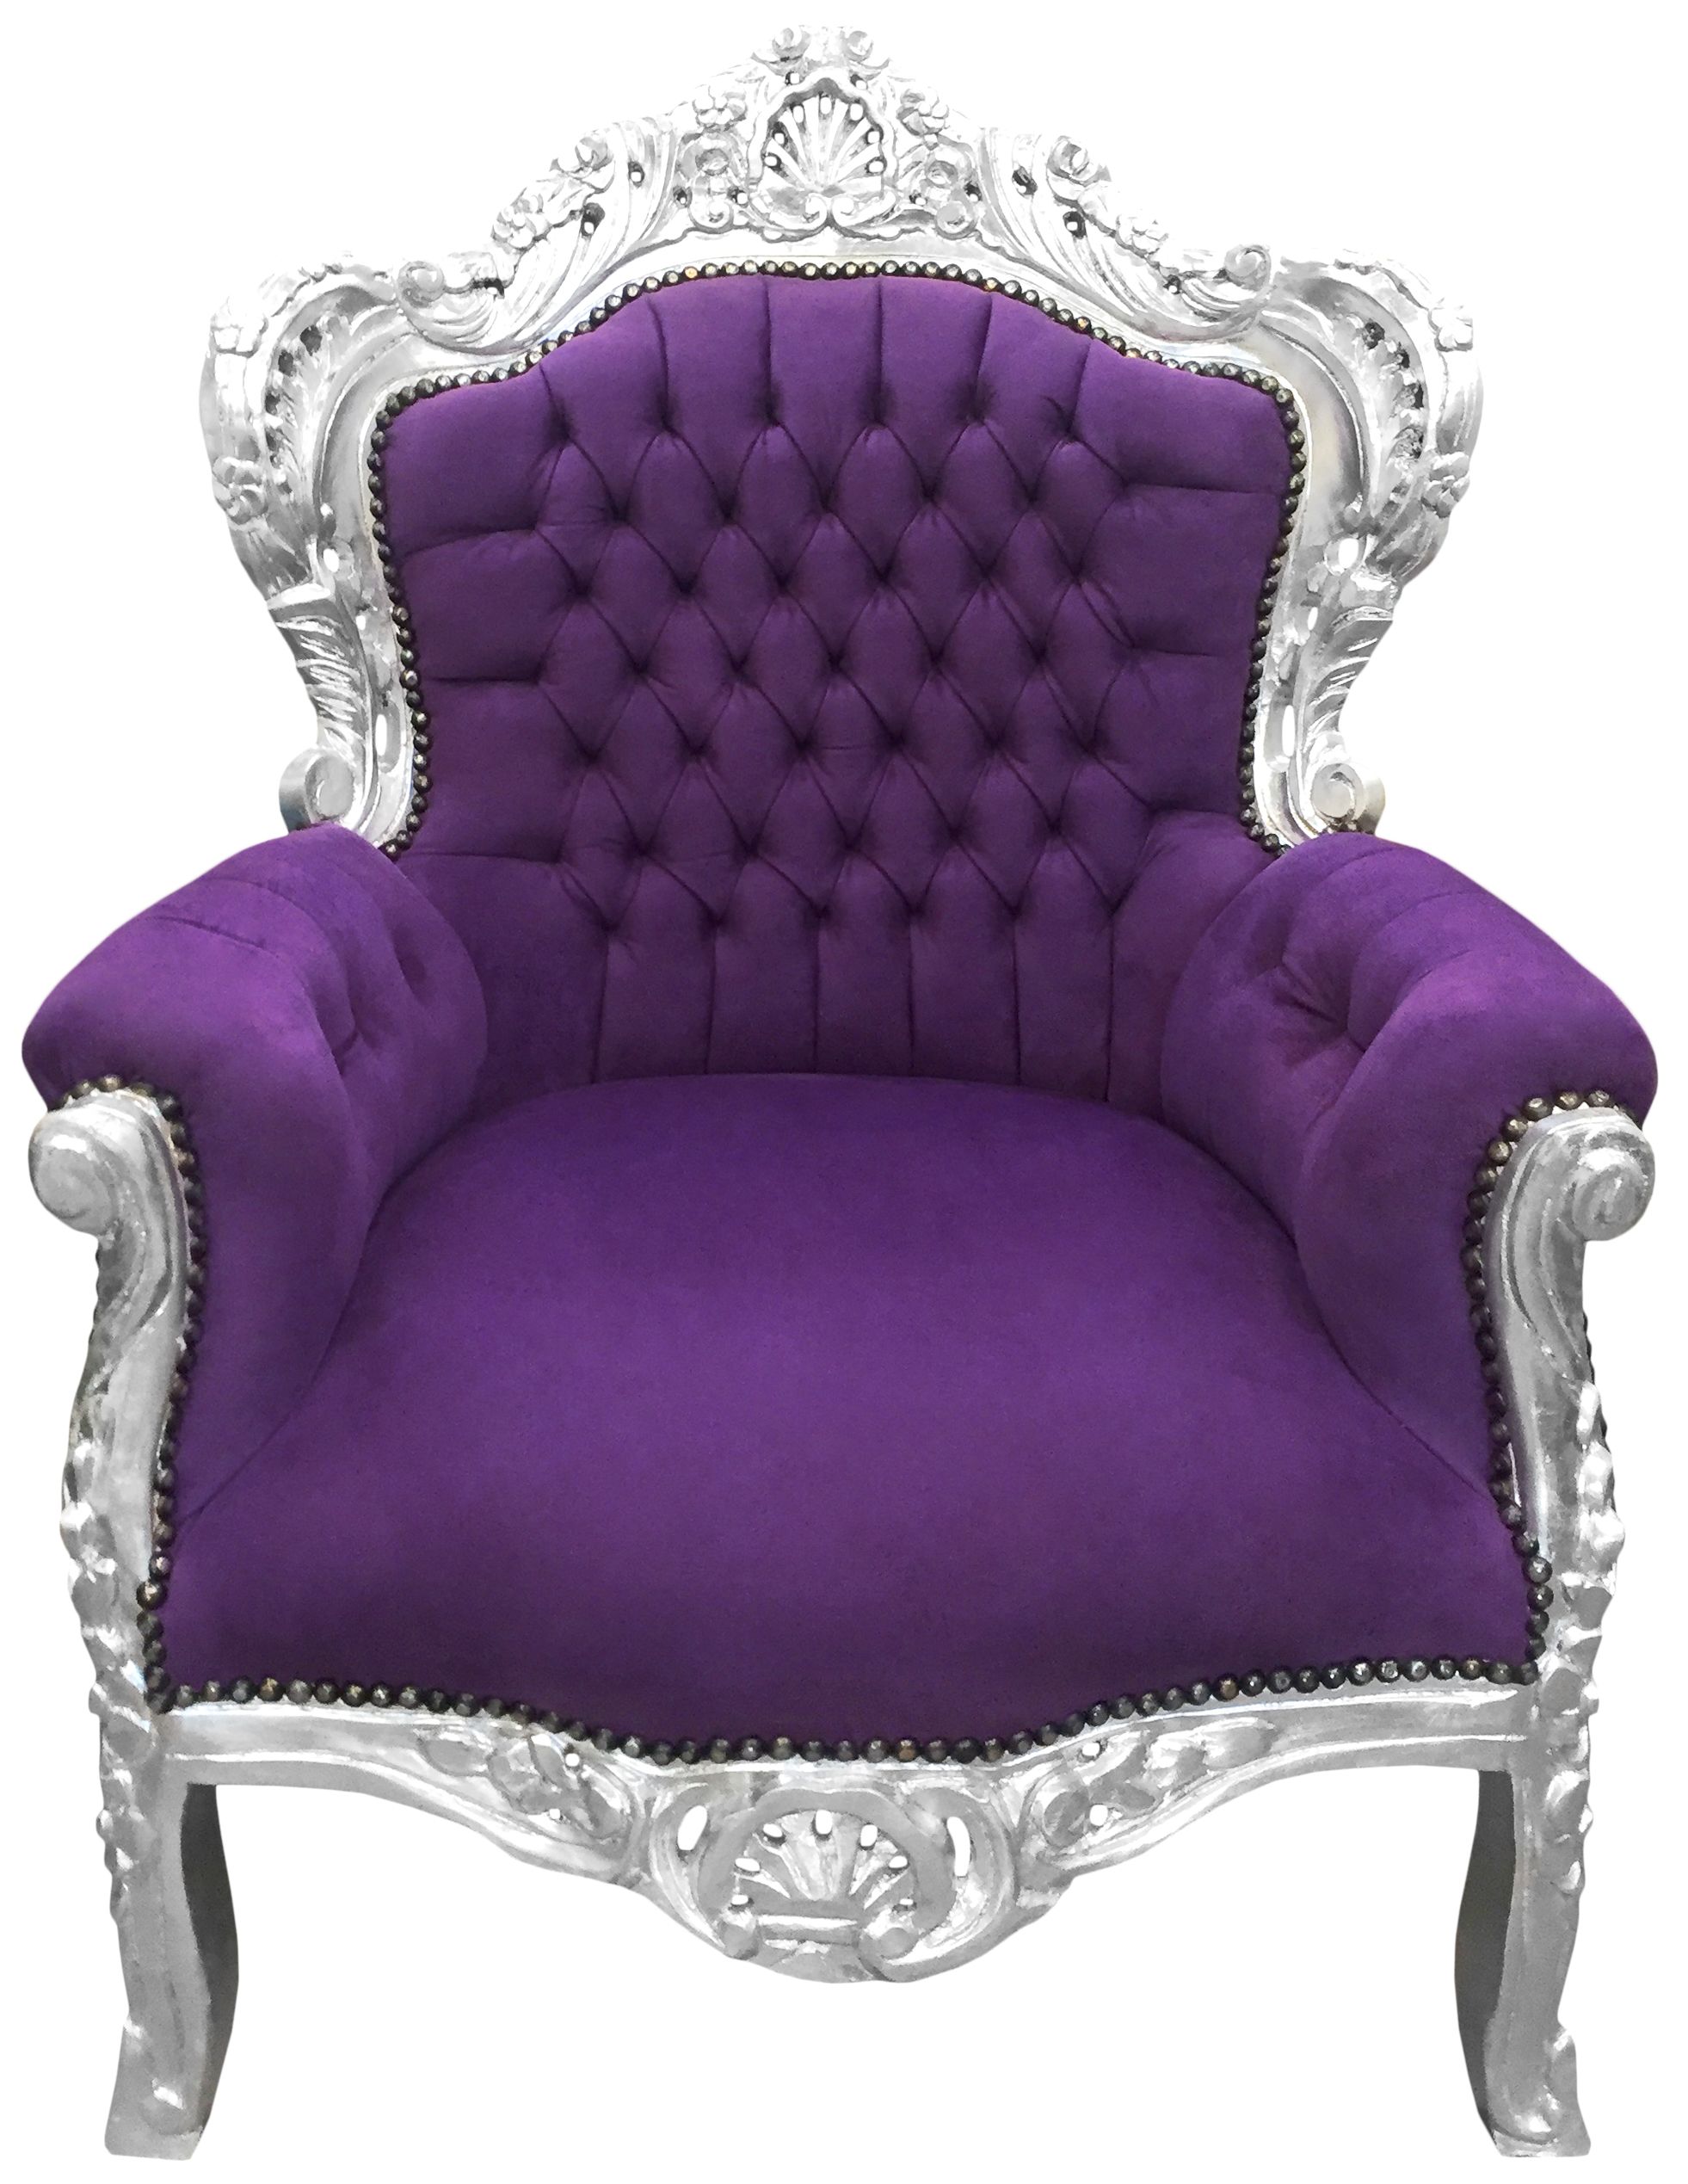 LOUIS XV ARM CHAIR FRENCH STYLE CHAIR VINTAGE FURNITURE PURPLE AND SILVER WOOD 